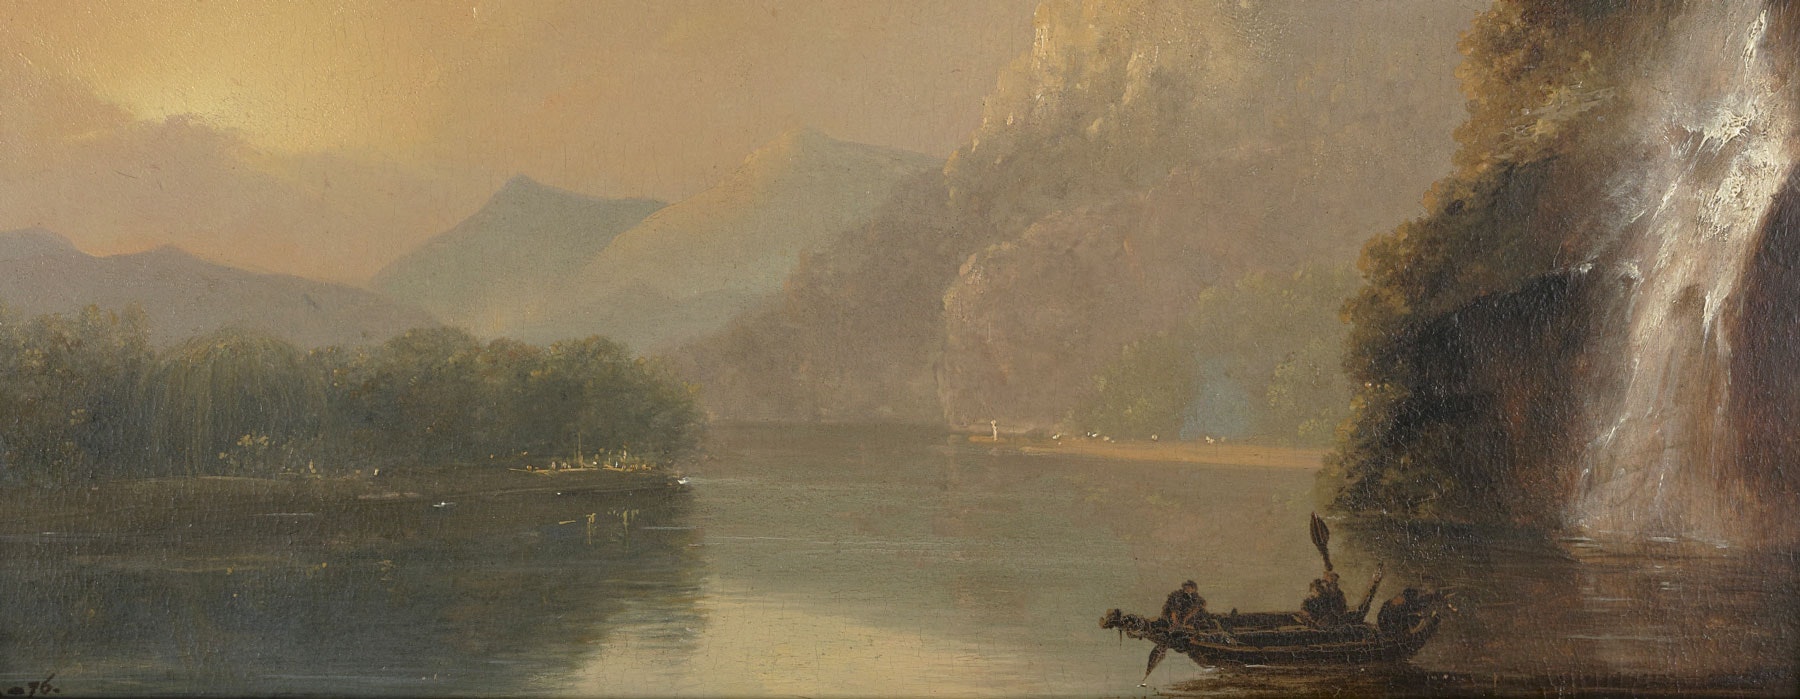 Painting of a small boat on the water with snow-capped mountains in the background